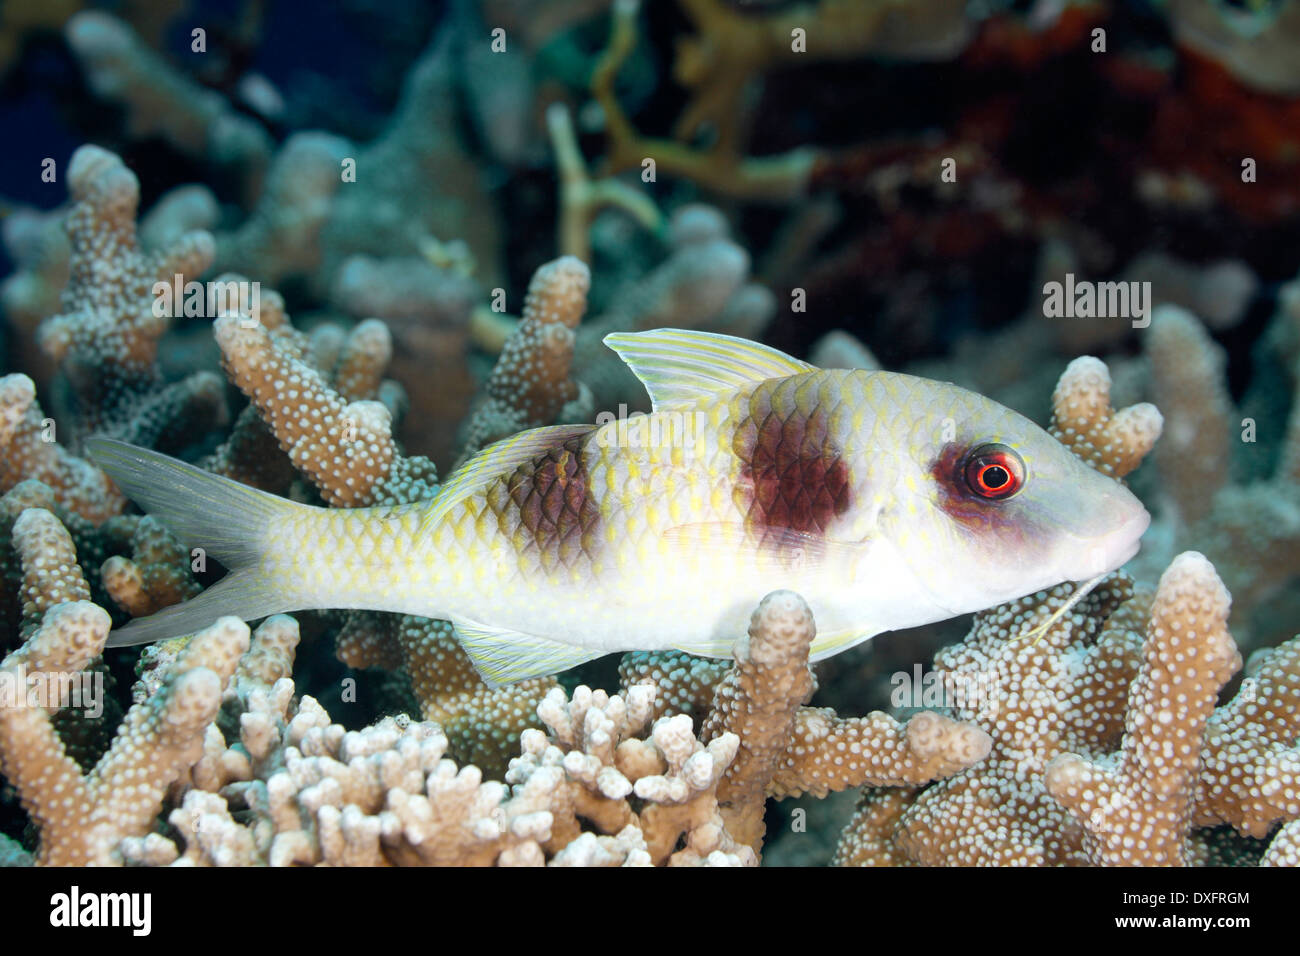 Doublebar or Two-Barred Goatfish, Parupeneus bifasciatus. This fish is resting on corals. Stock Photo